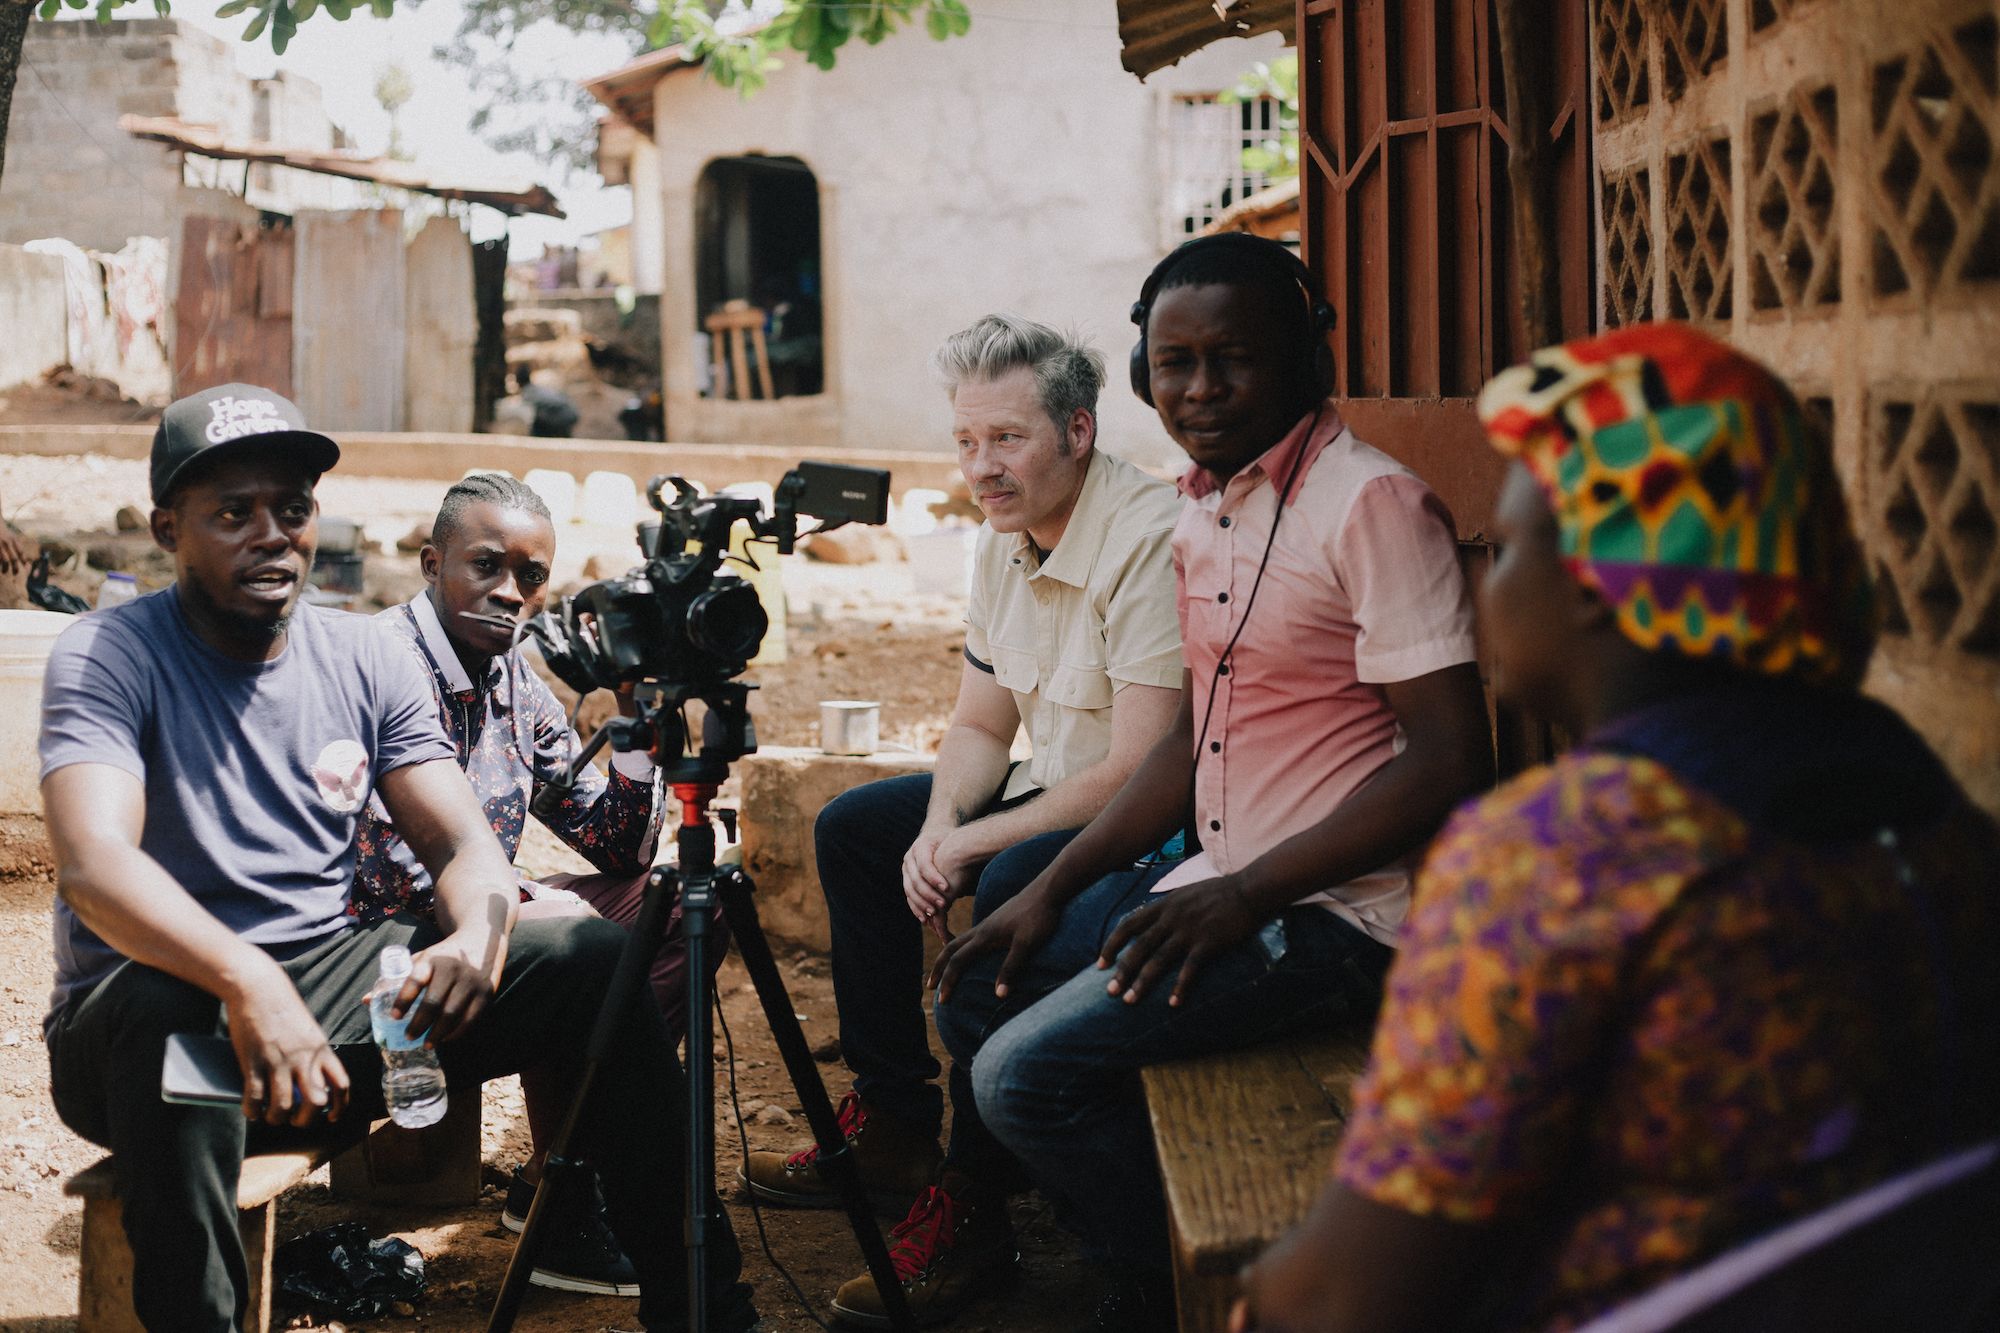 Tamlin Hall and his crew filming a documentary scene outdoors in Sierra Leone